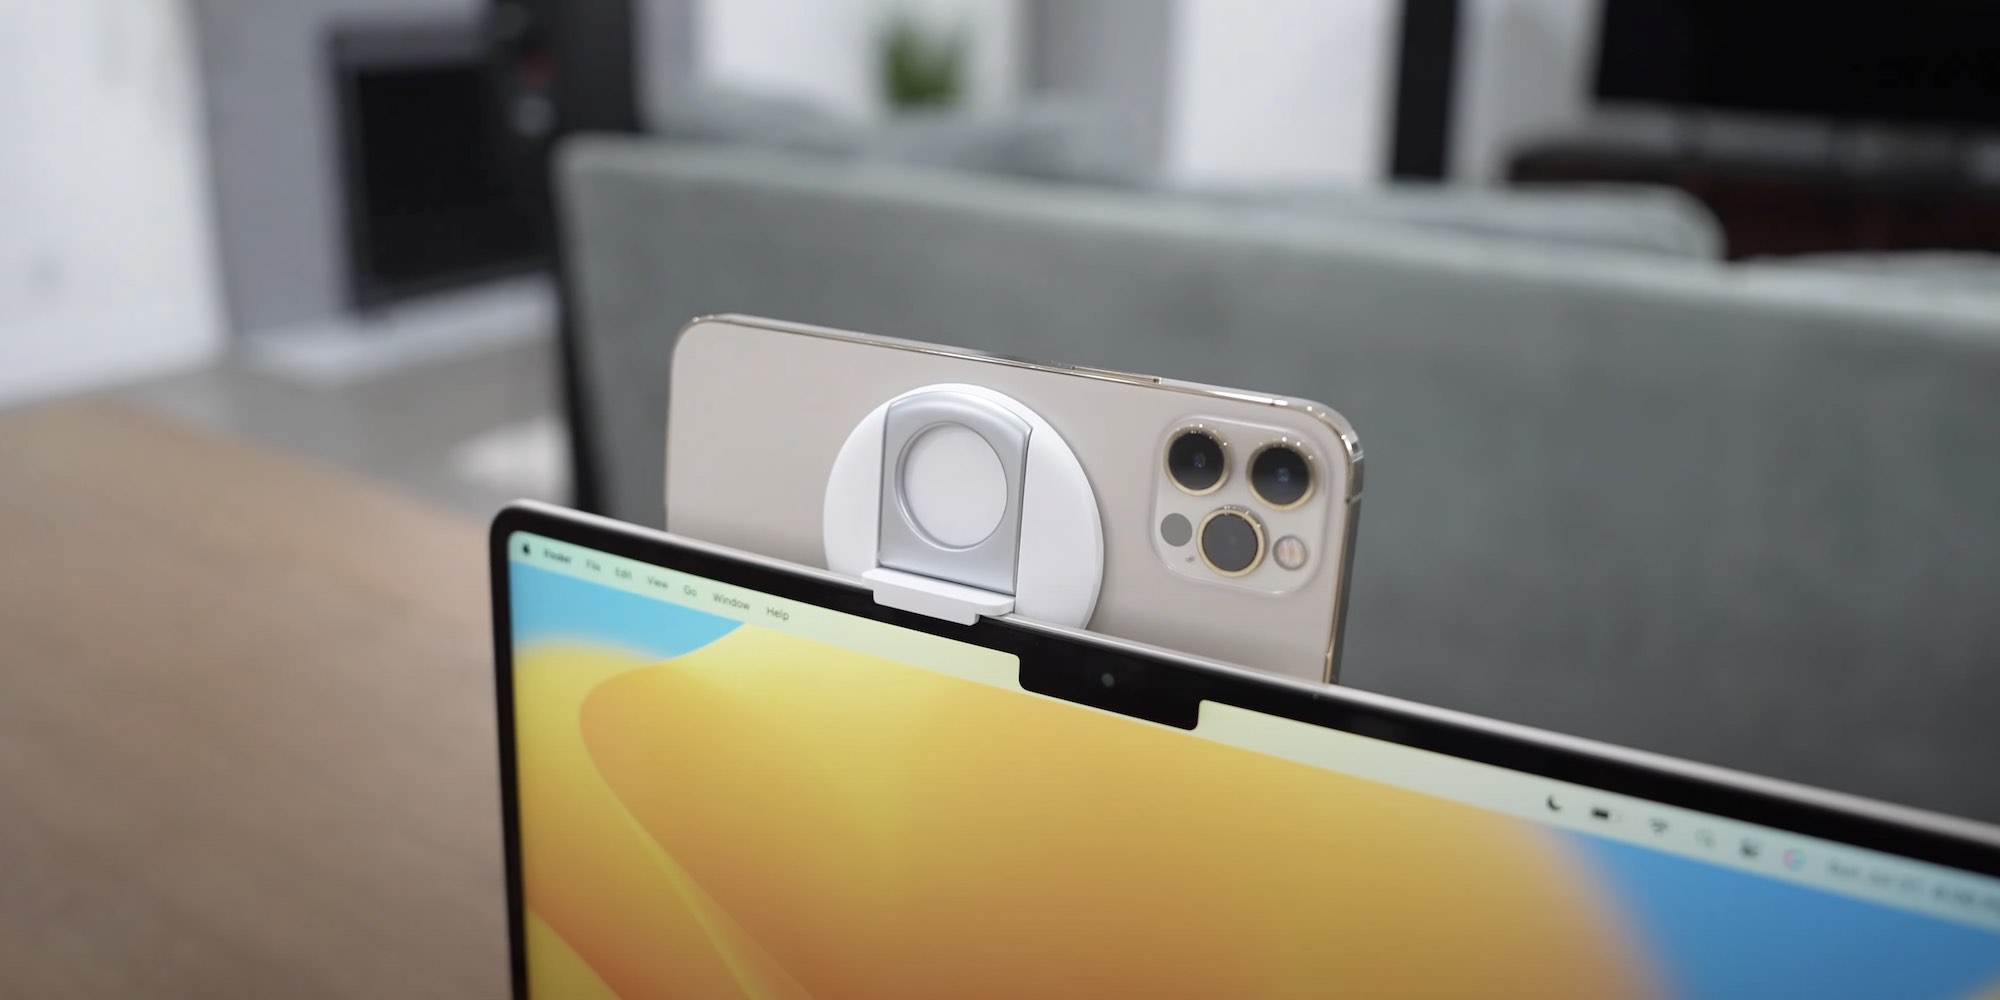 Hands-on: Belkin's Continuity Camera mount for iPhone - 9to5Mac